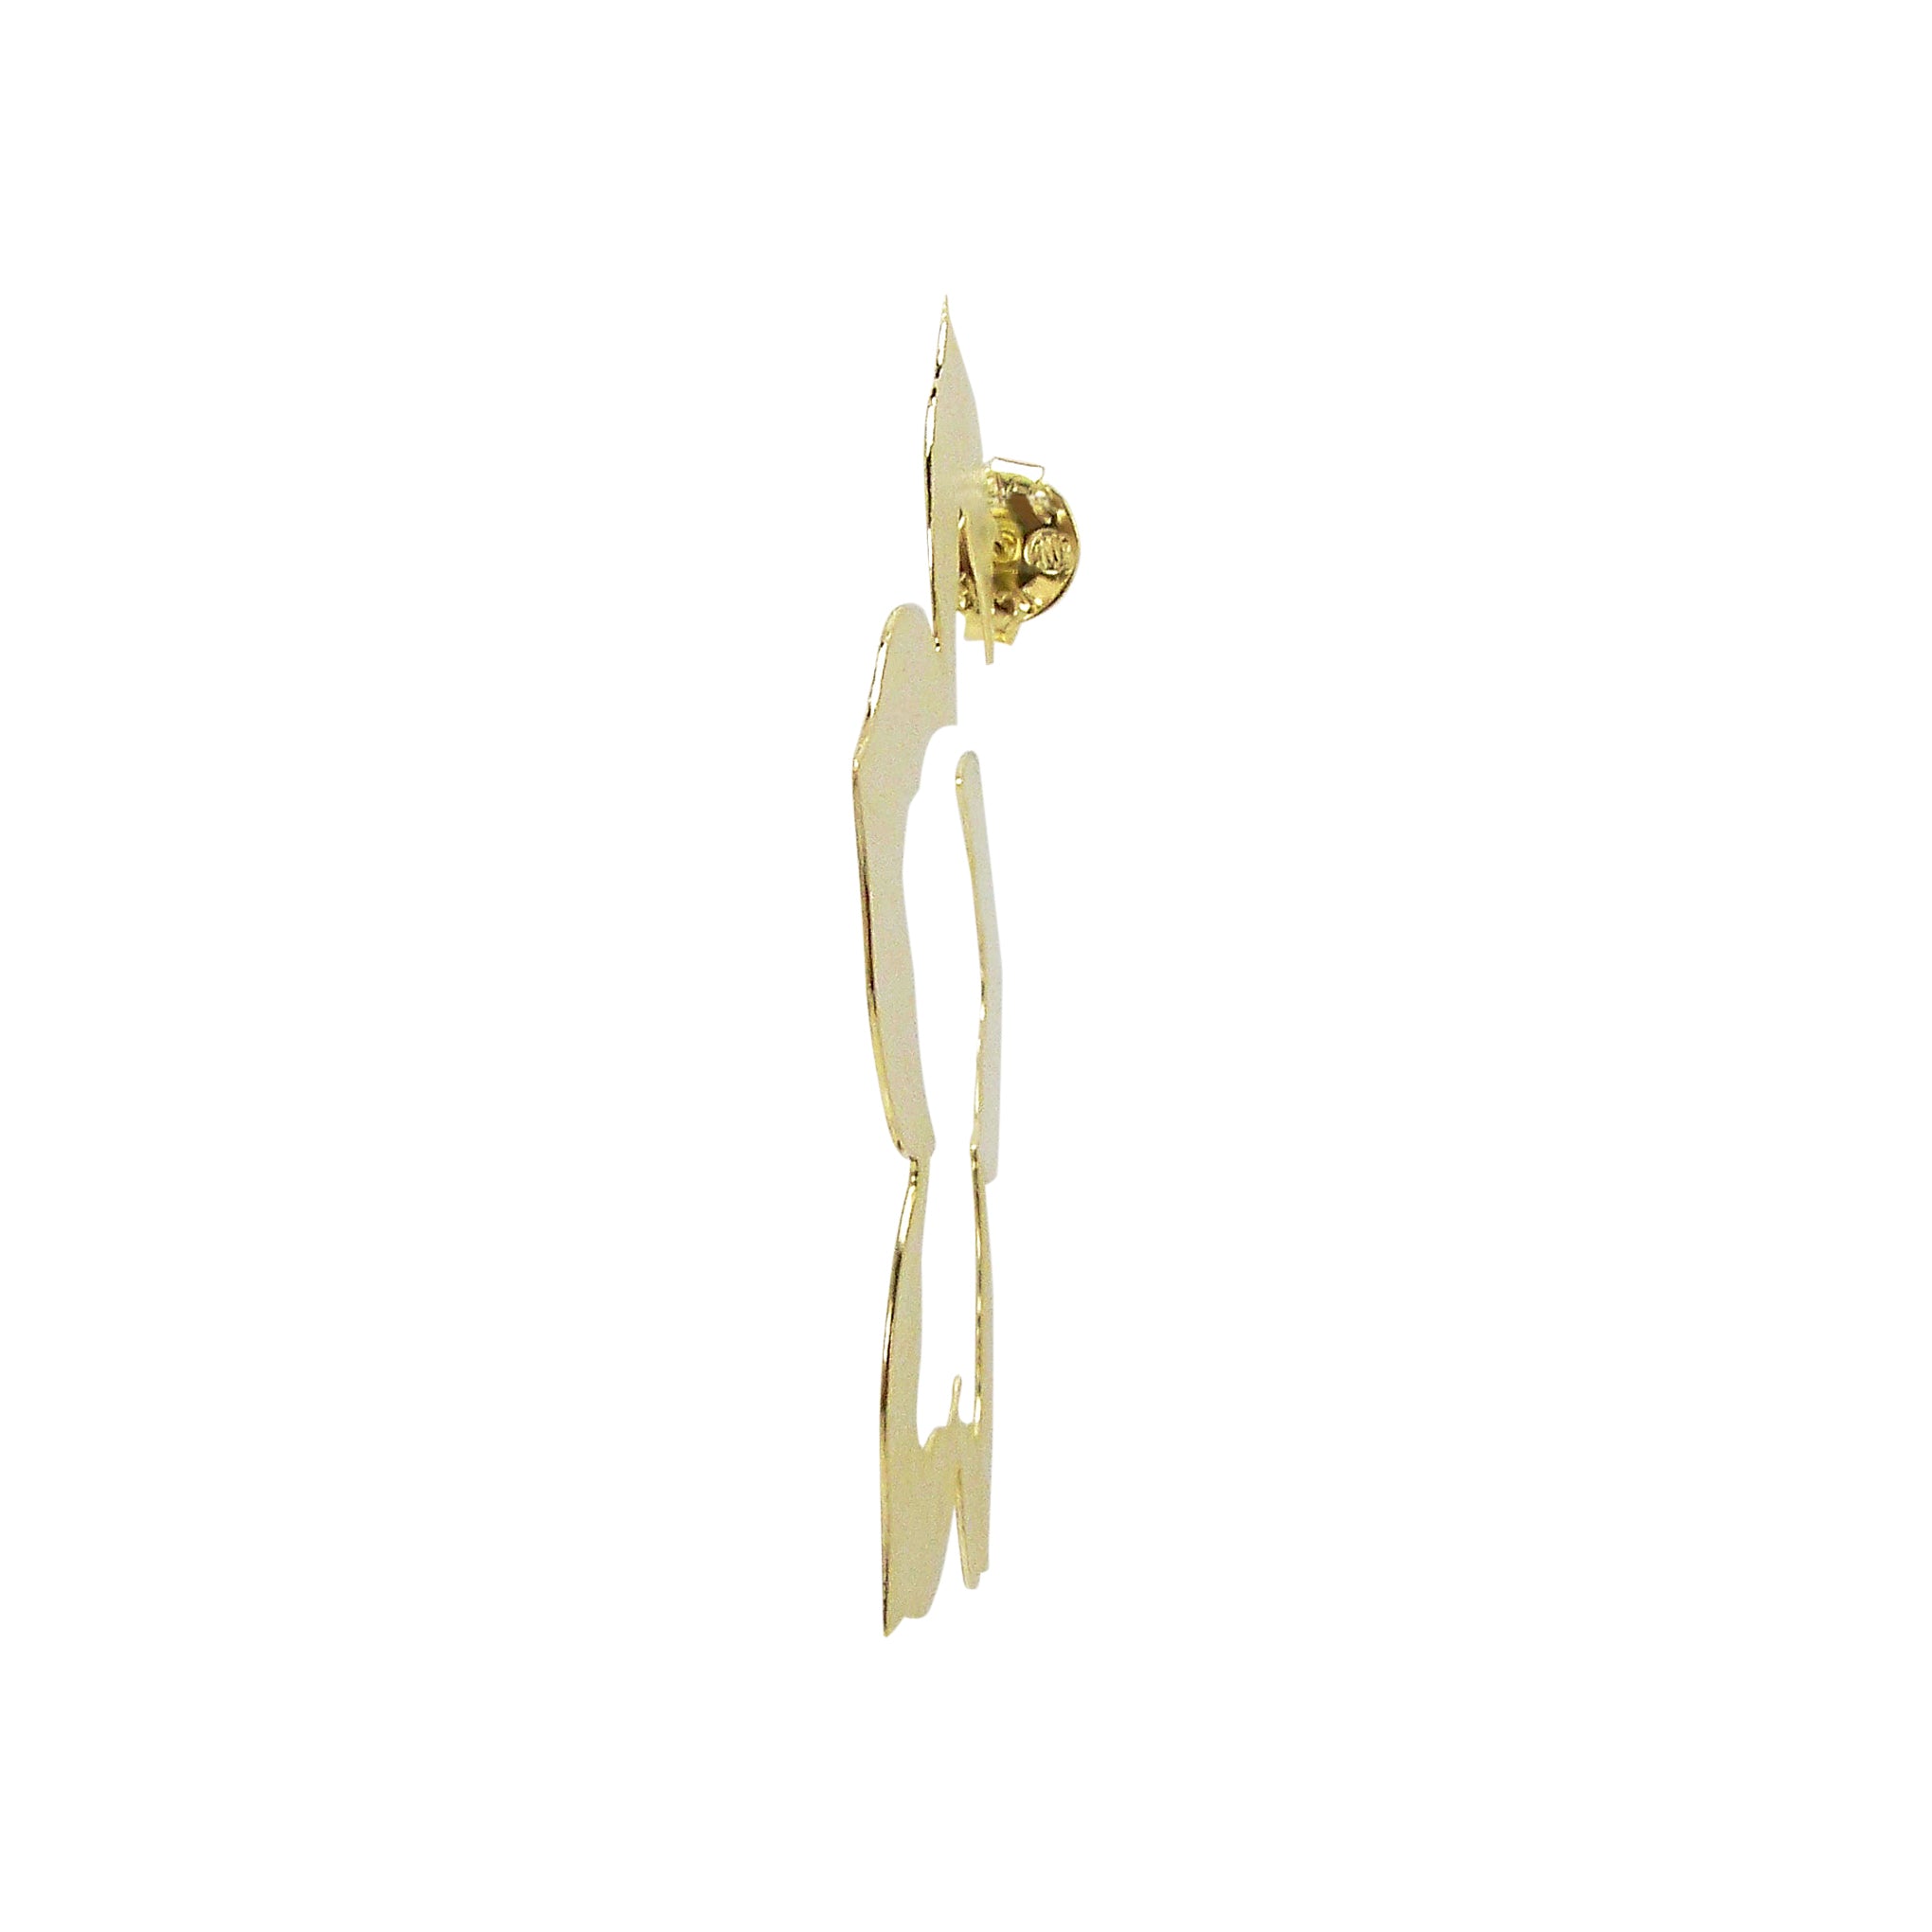 front image of single Sheila Fajl Flora Flower Inspired Hoop Earrings in Brushed Gold Plated